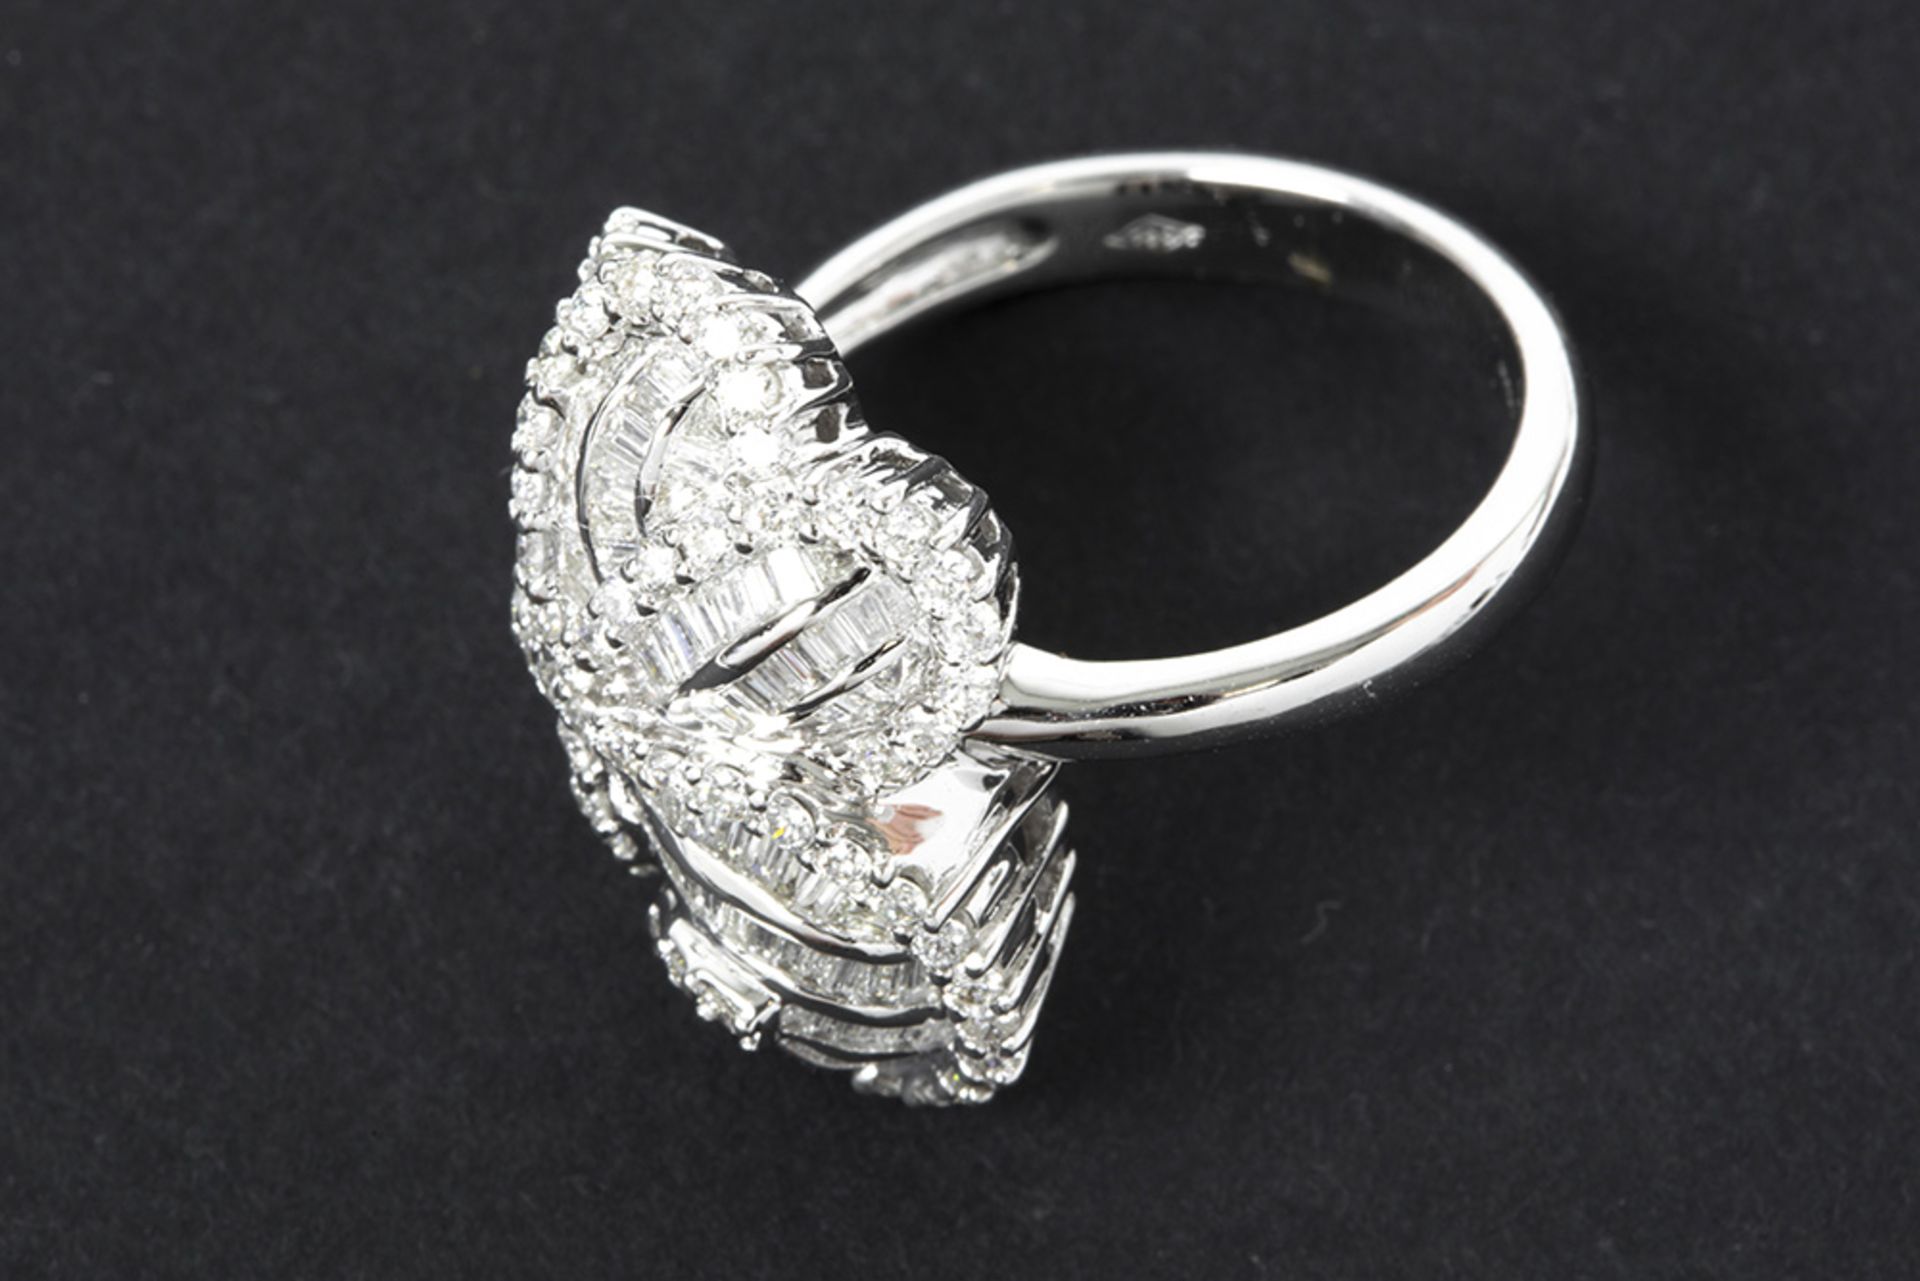 ring in white gold (18 carat) with 1,75 carat of high quality brilliant and baguette cut diamonds || - Bild 2 aus 2